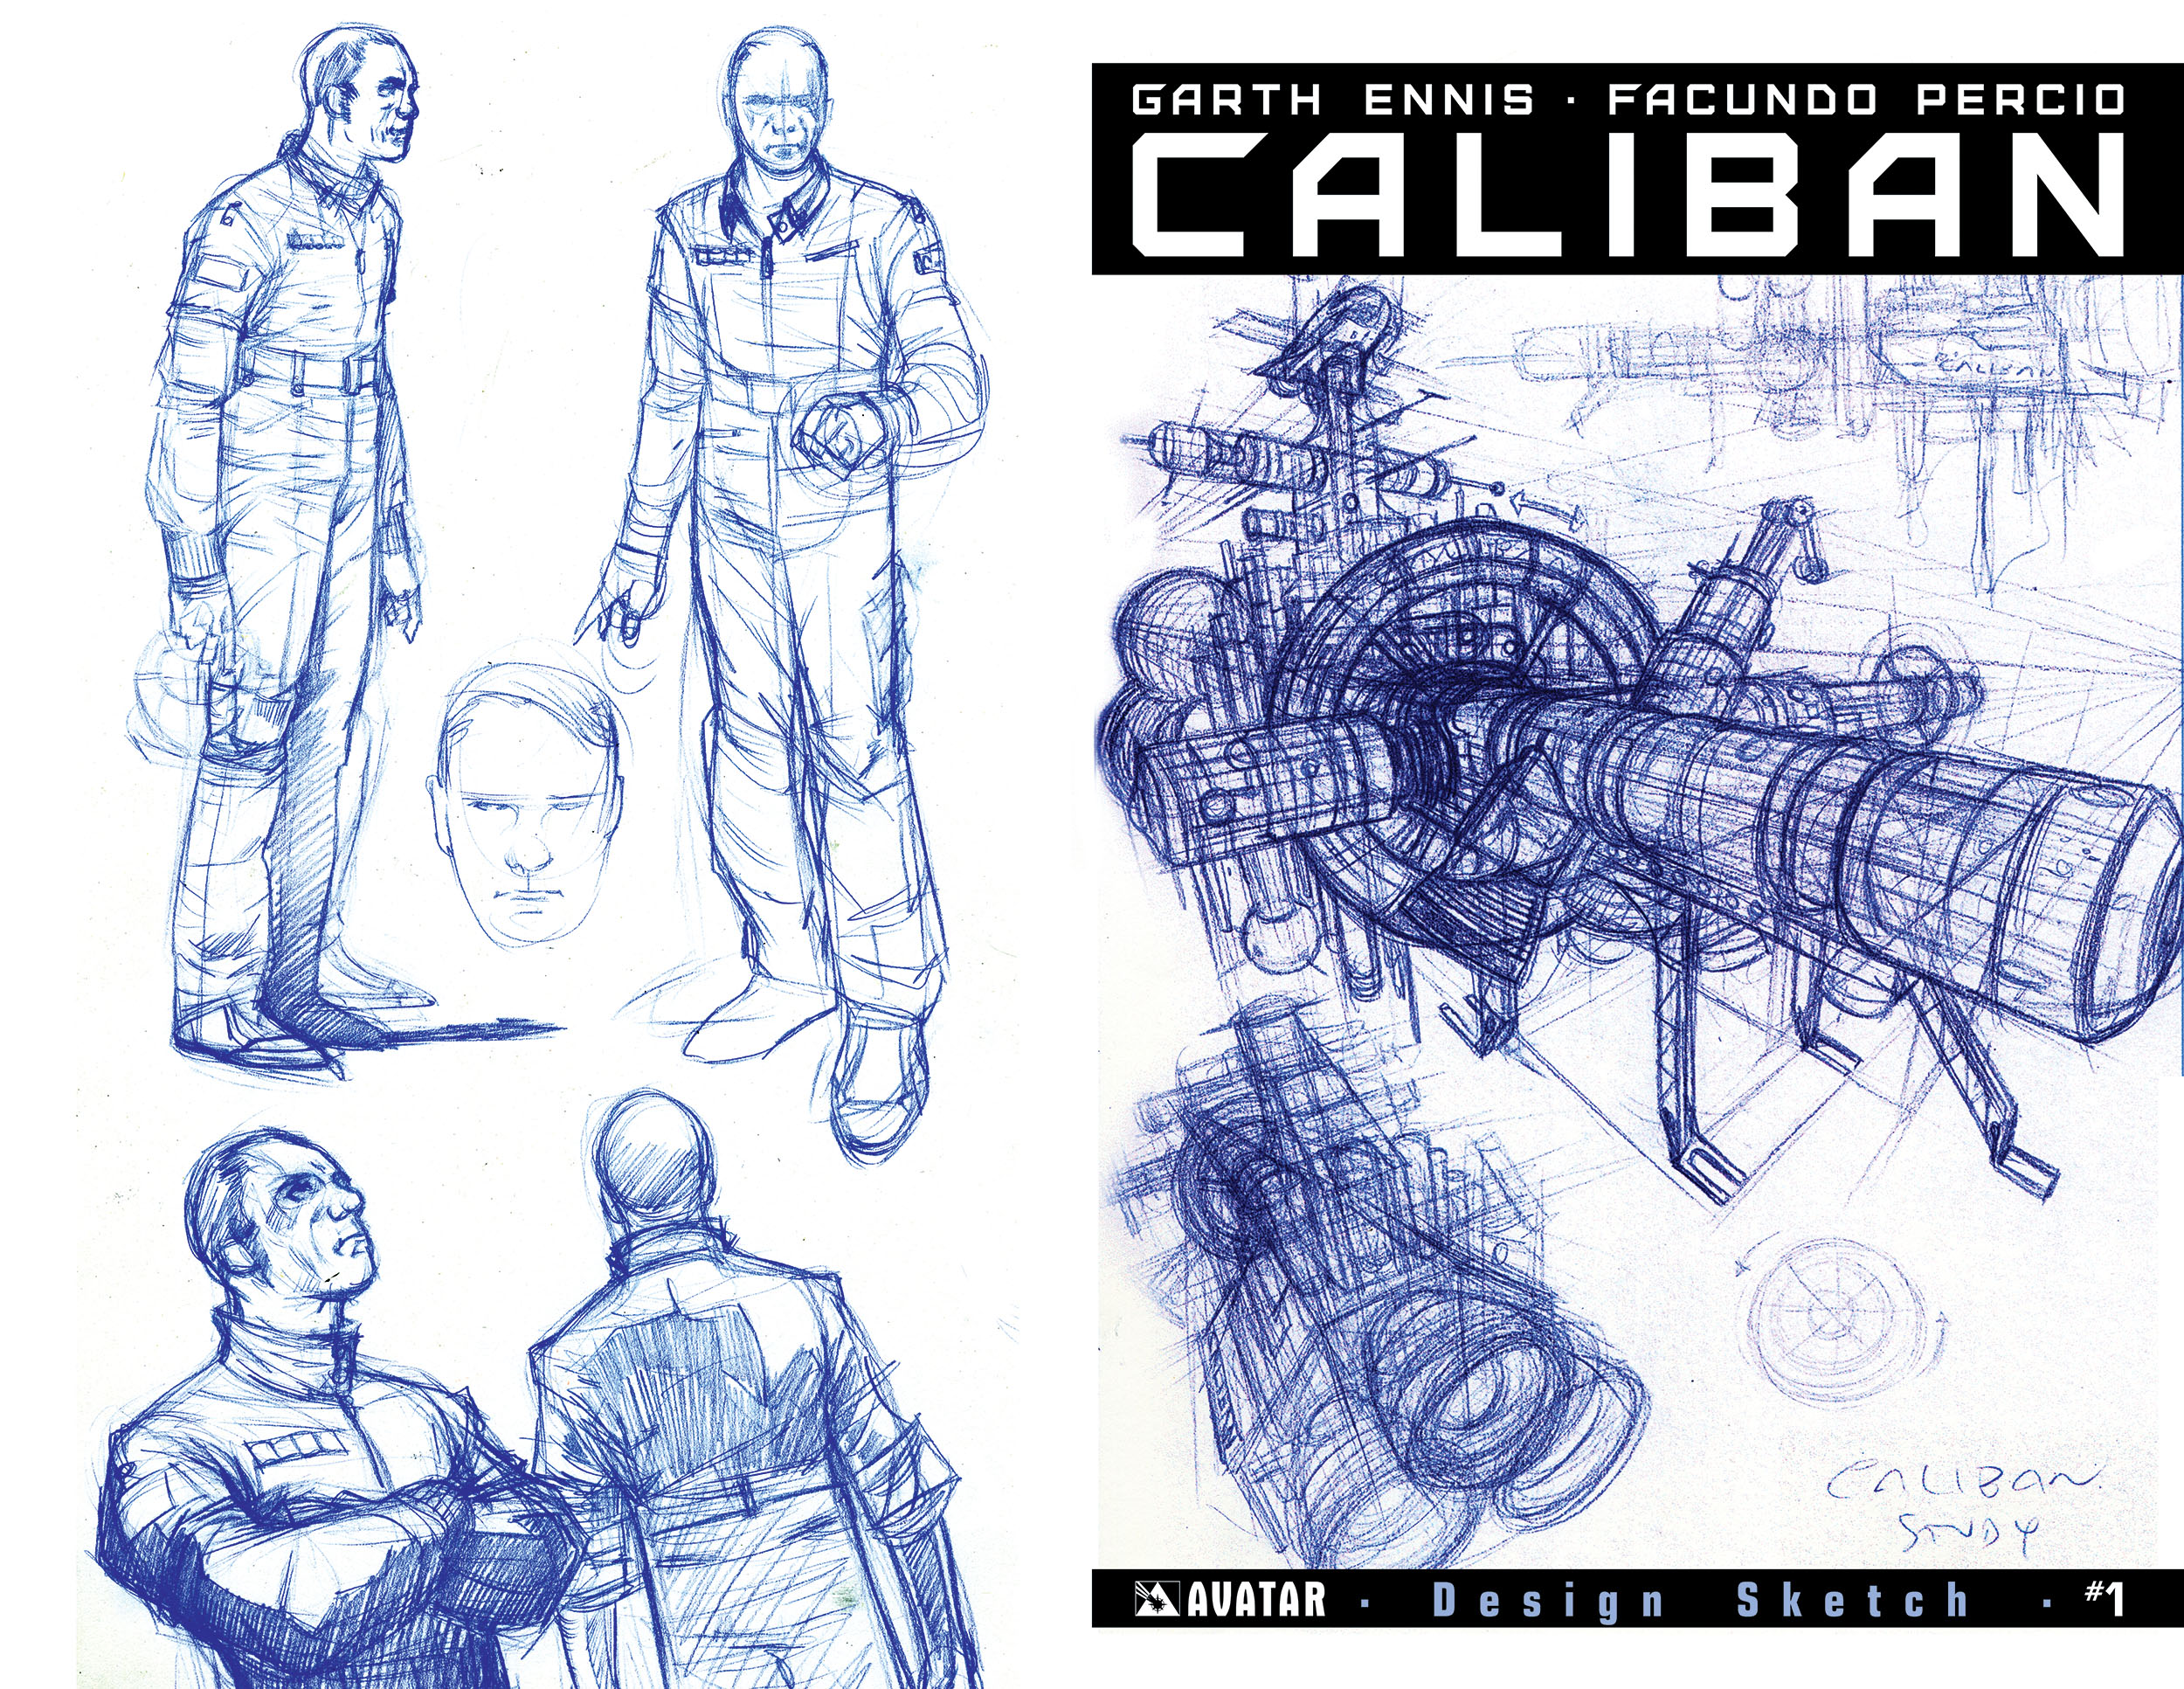 Read online Caliban comic -  Issue #1 - 4